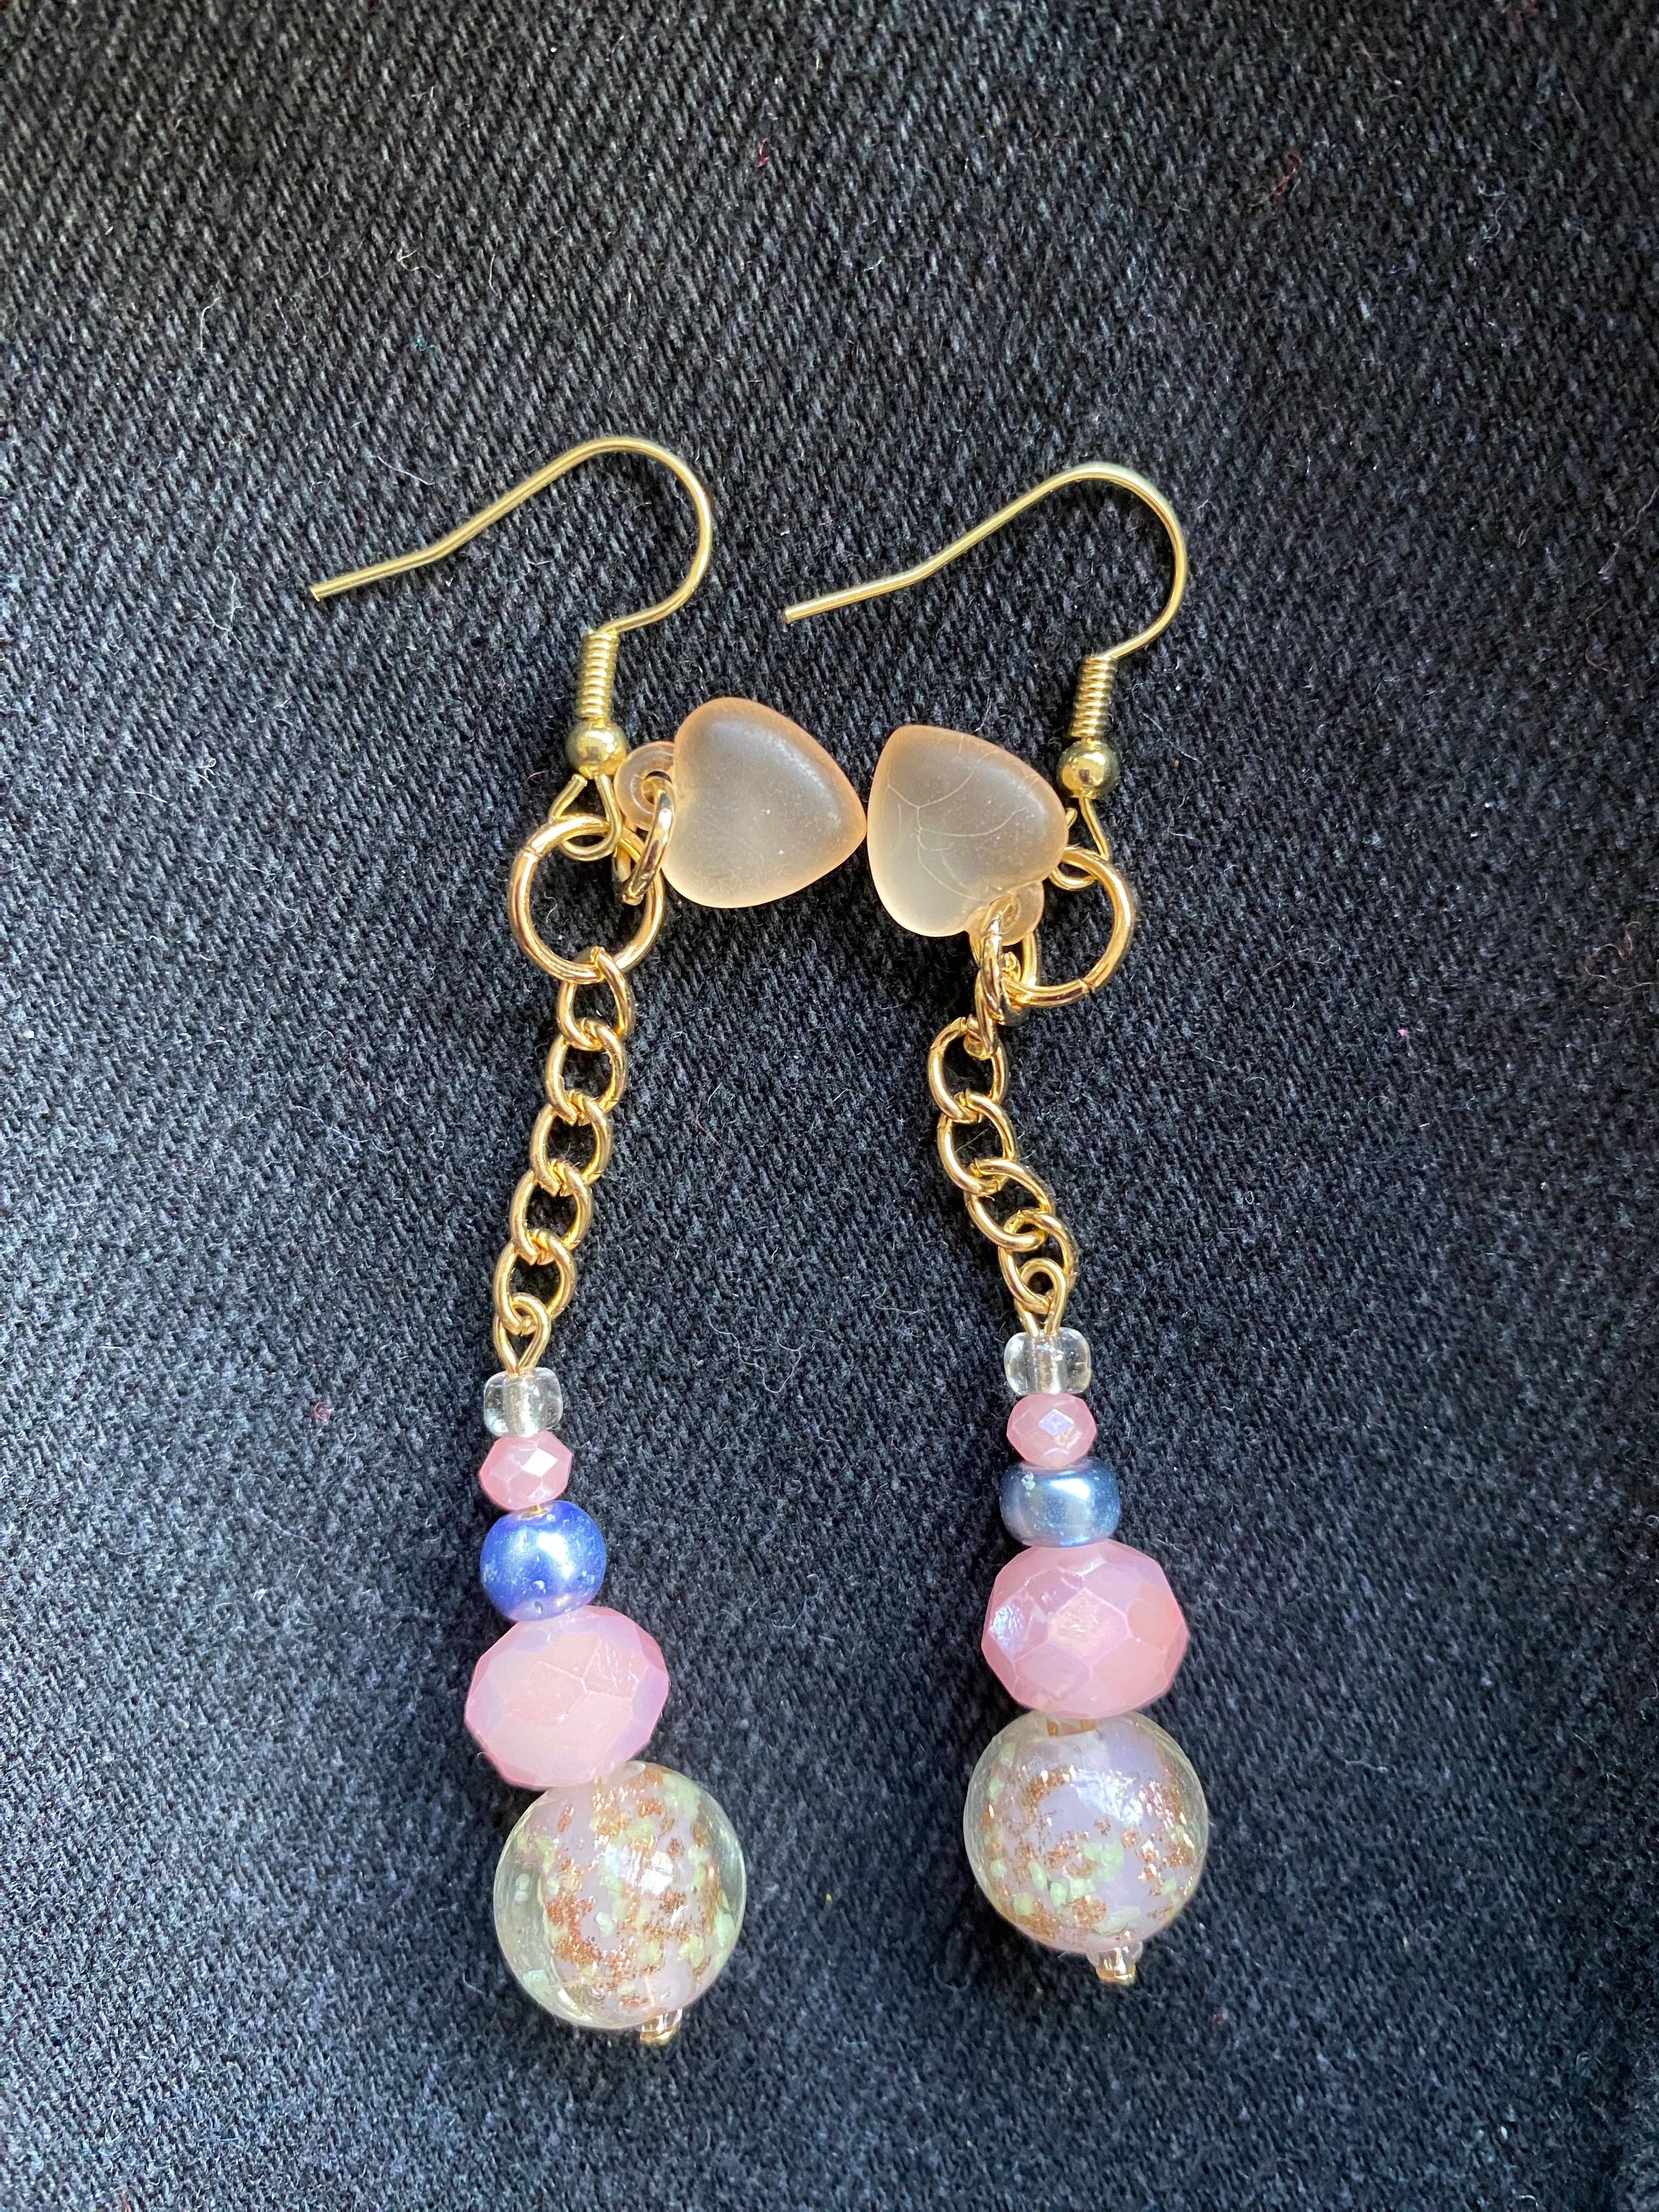 Retro Sci Fi Chain and Pink Planet Earrings